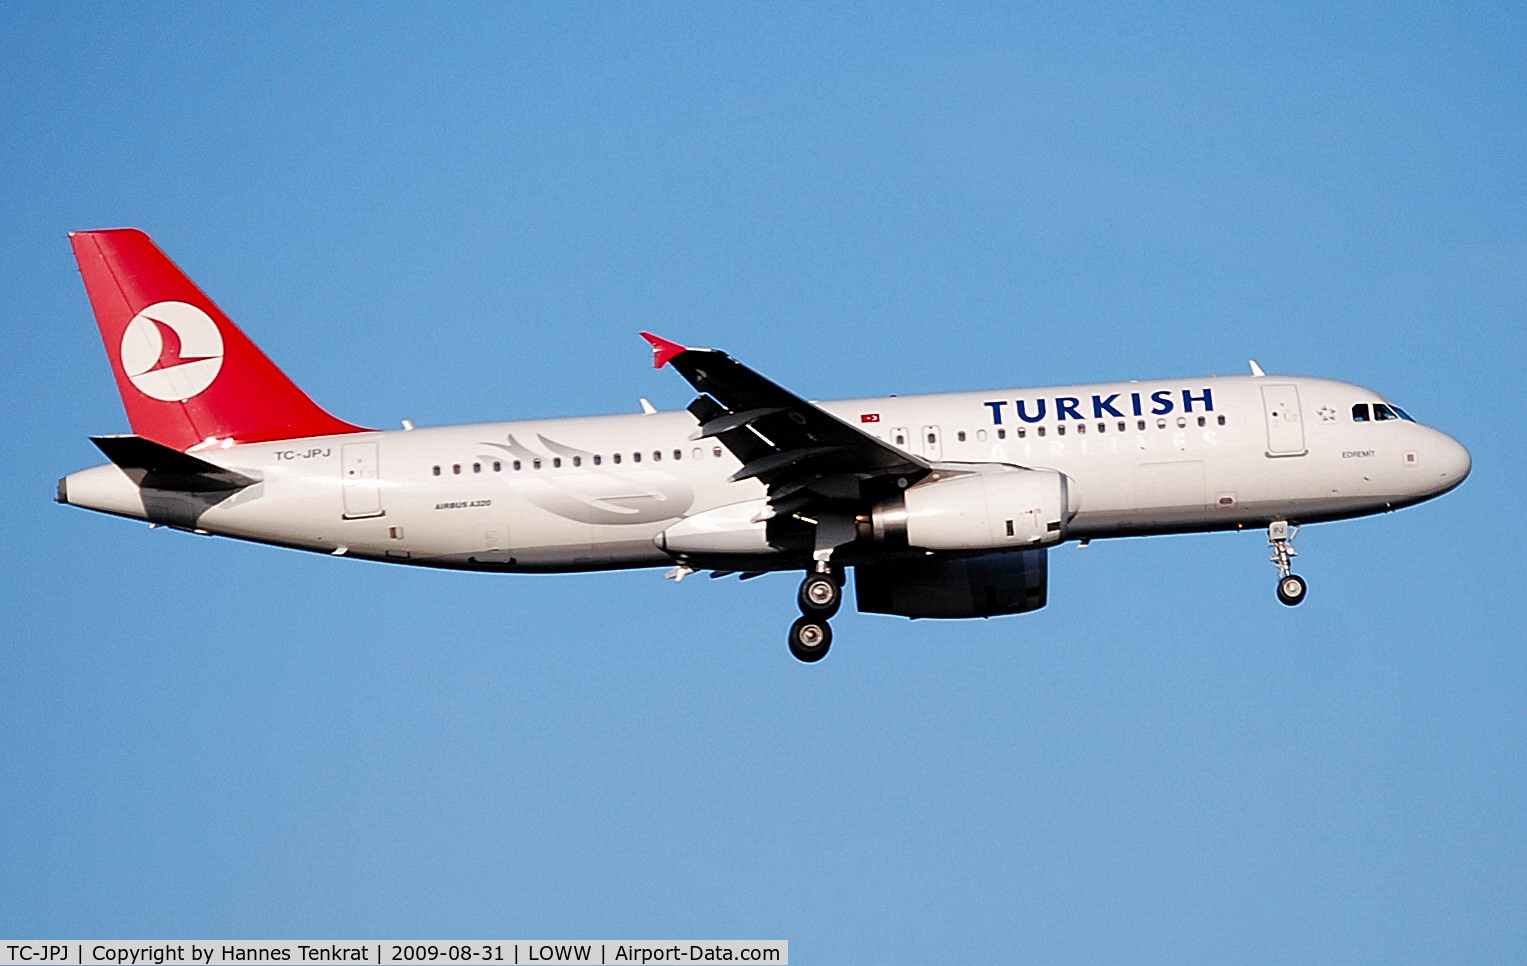 TC-JPJ, 2007 Airbus A320-232 C/N 3239, Turkish Airlines Airbus A320